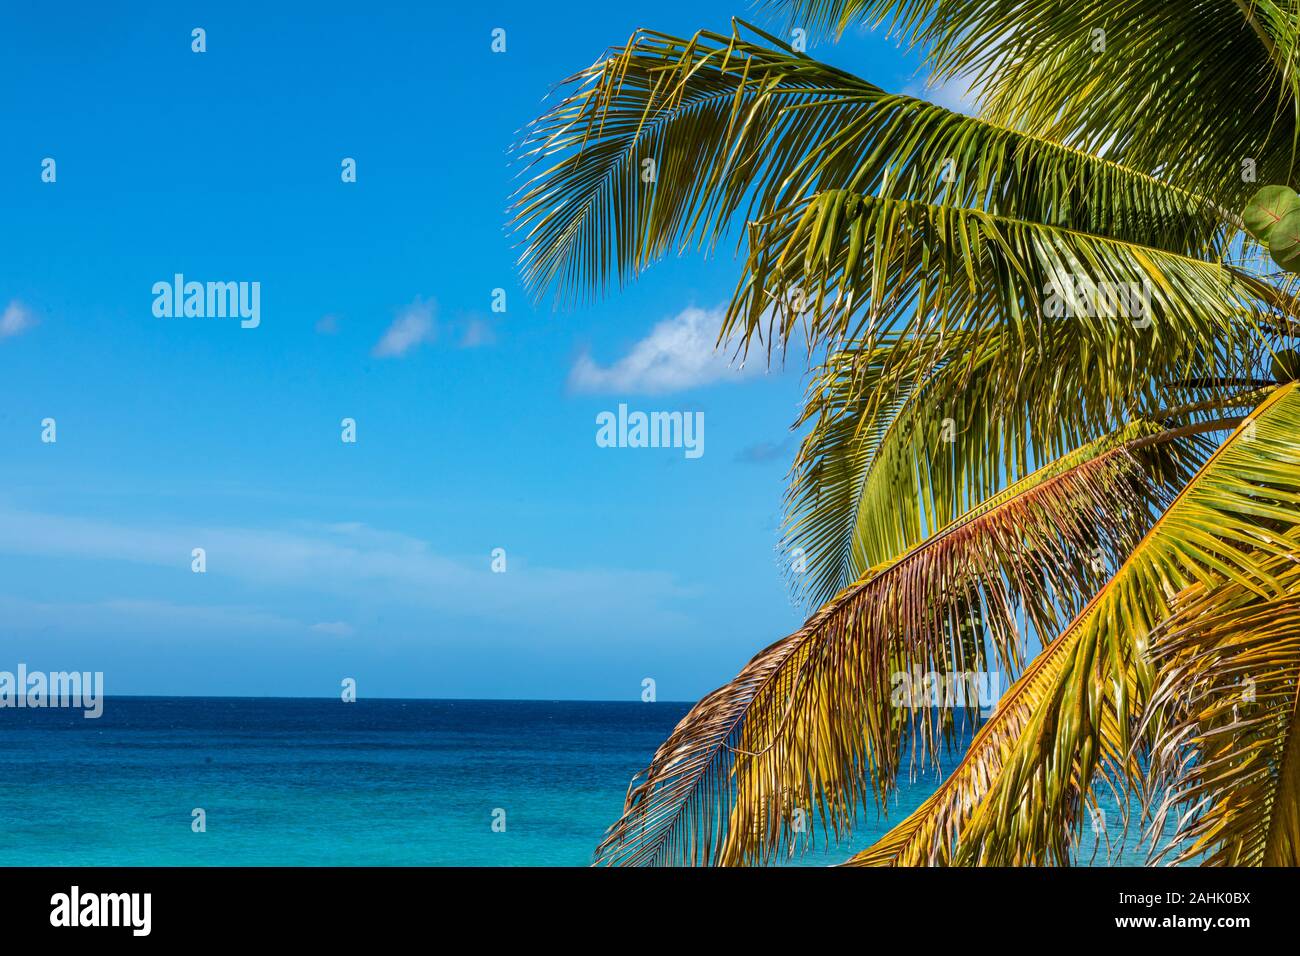 Trinidad, Cuba. Coconut on an exotic beach with palm tree entering the sea on the background of a sandy beach, azure water, and blue sky. Stock Photo